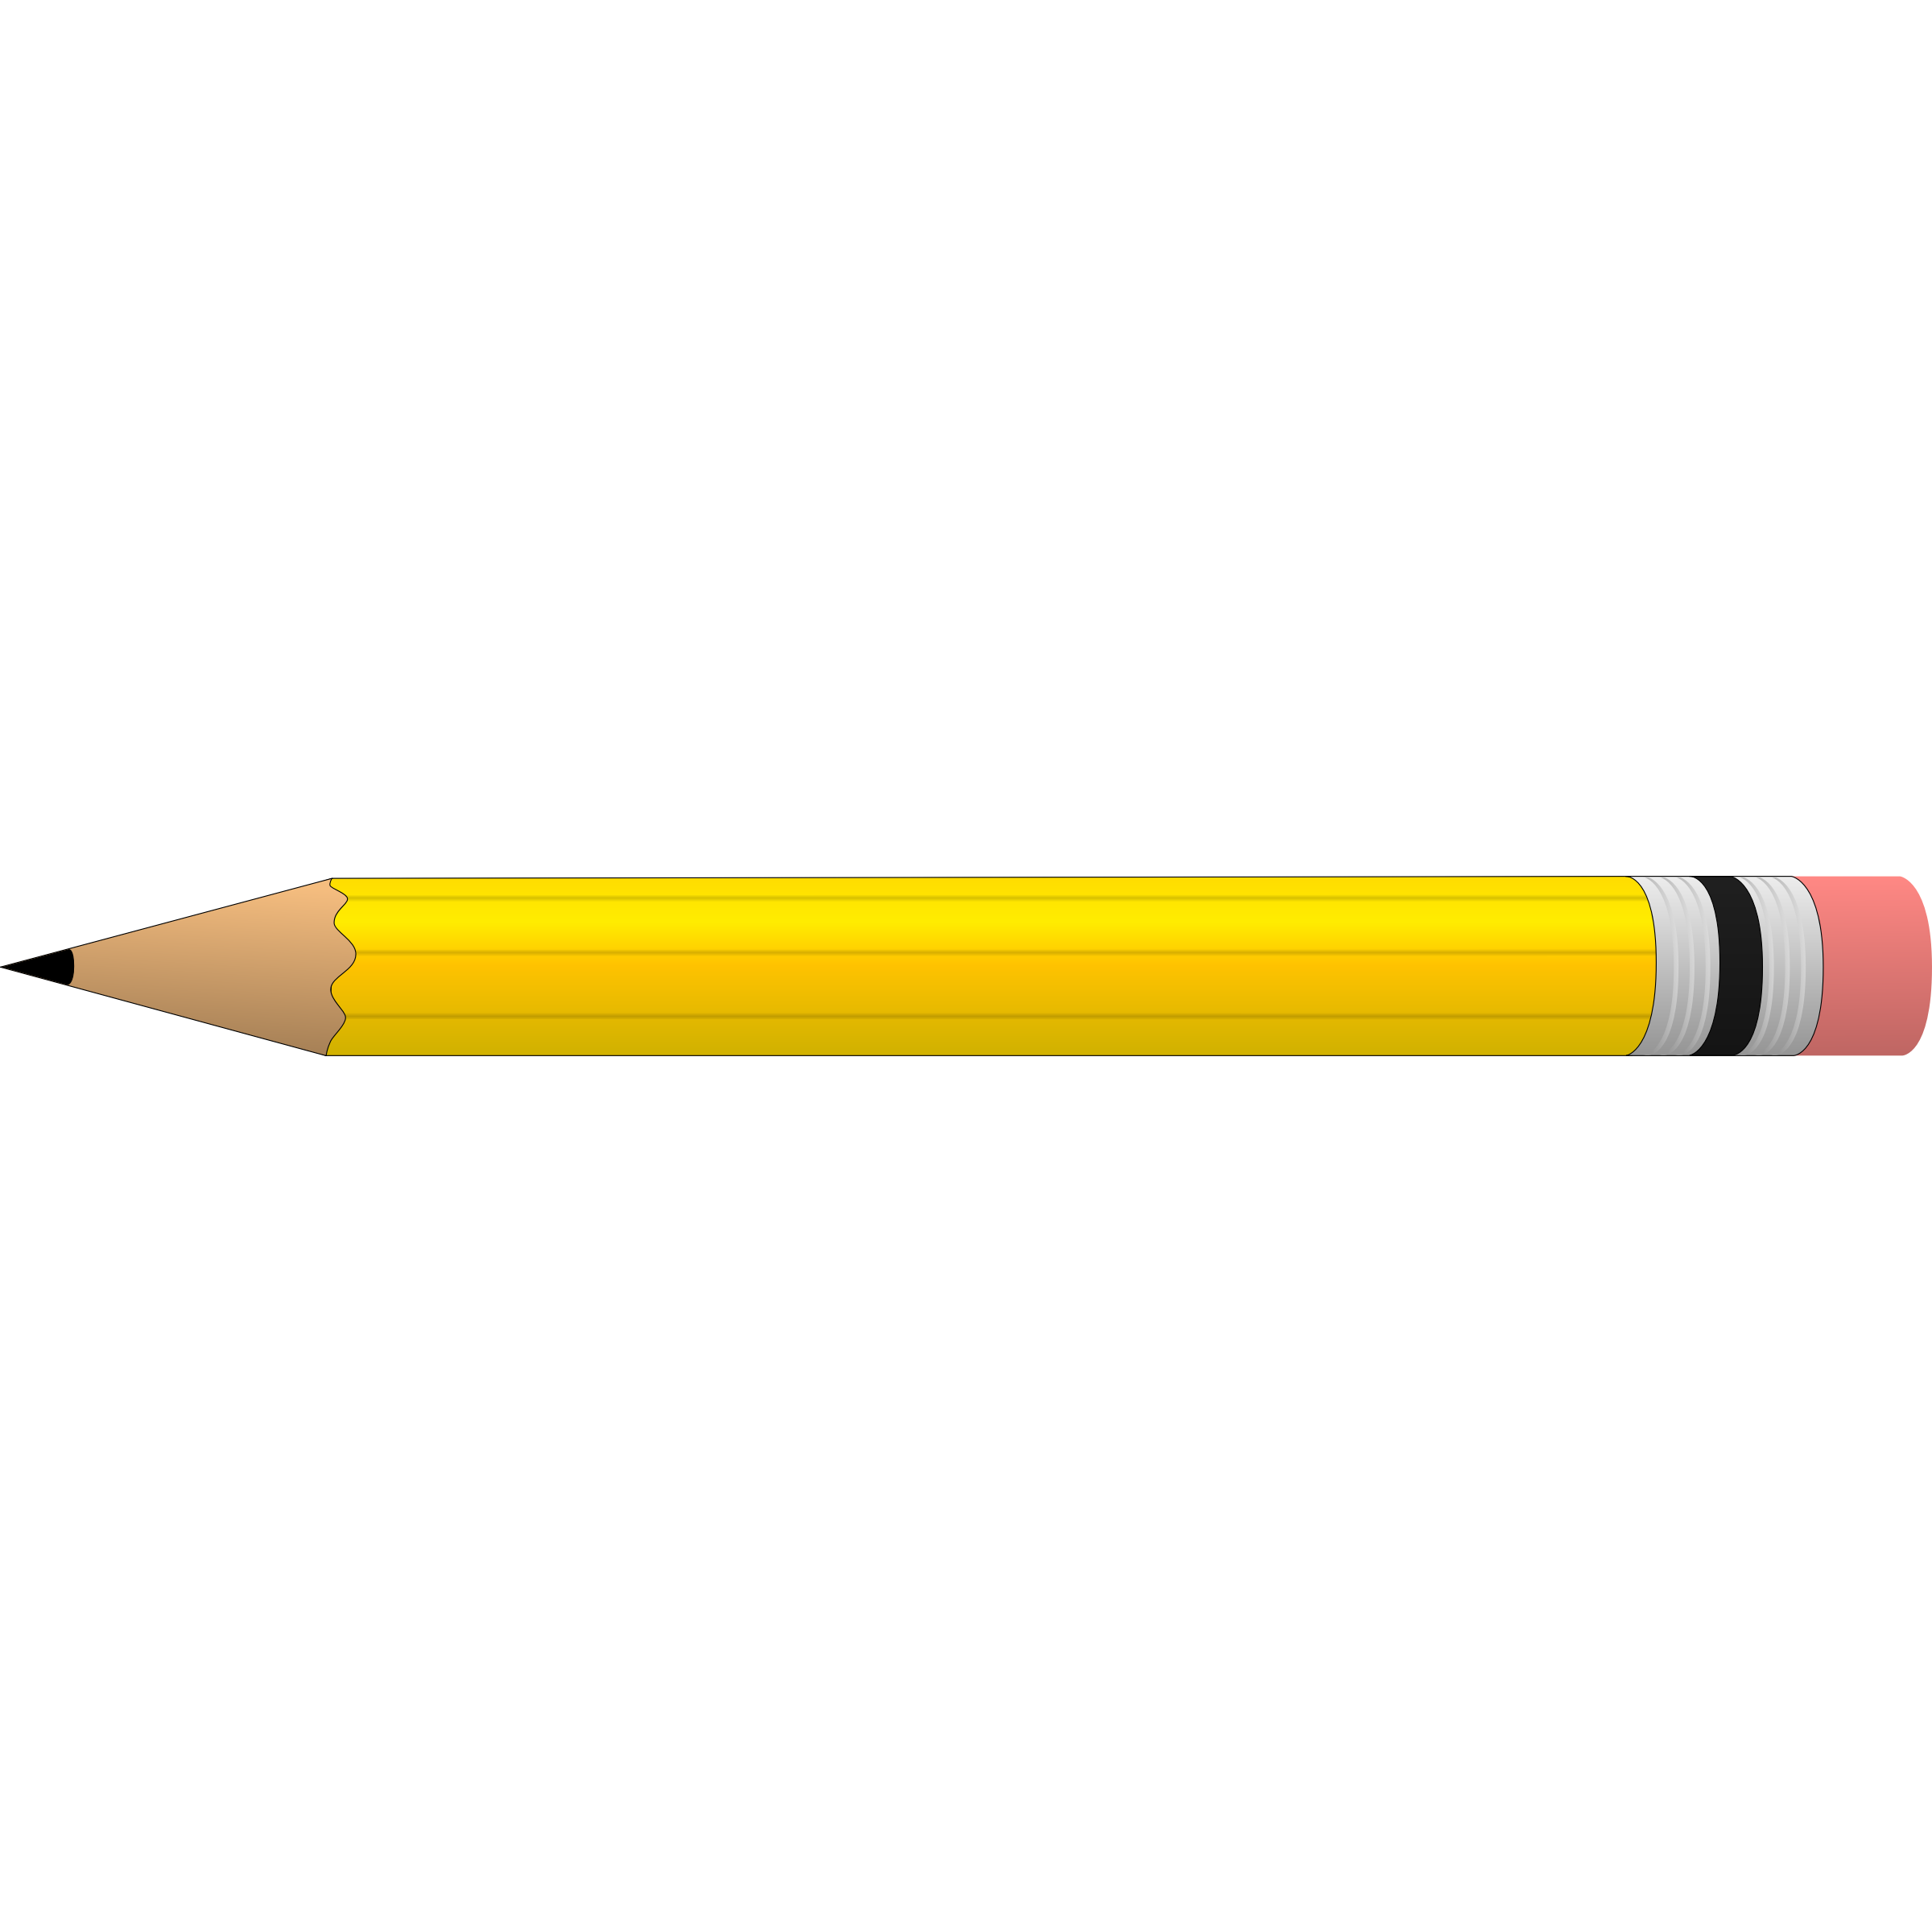 Free Image Of Pencils, Download Free Image Of Pencils png images, Free